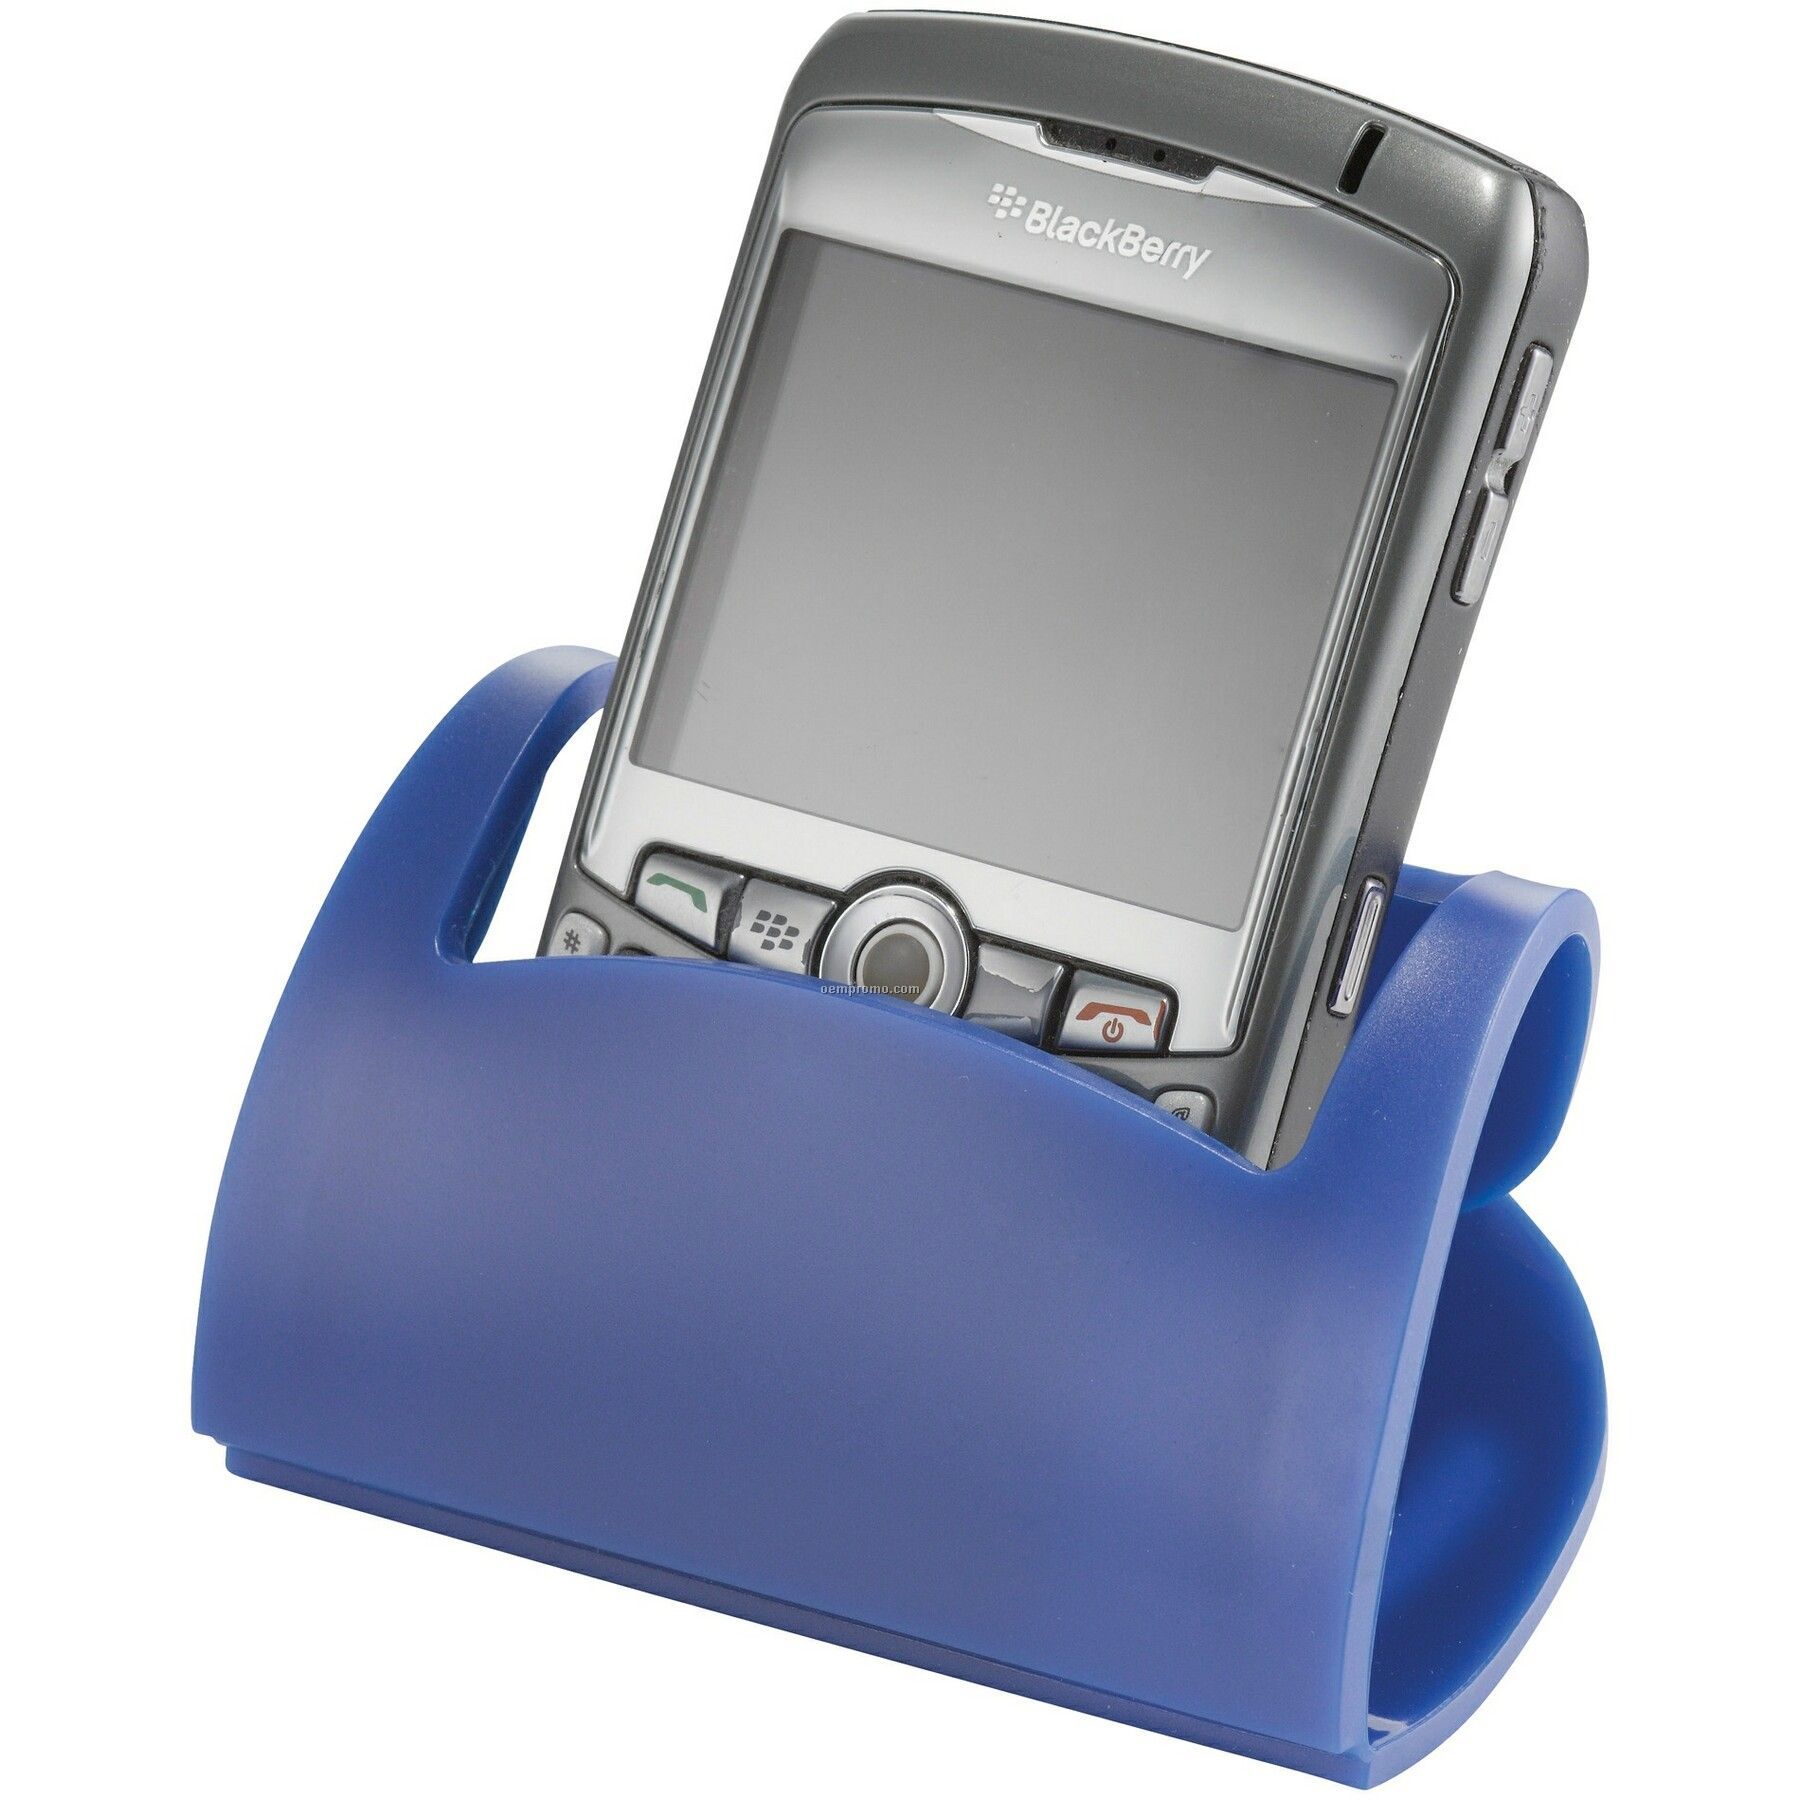 Hold That! Mobile Phone Holder